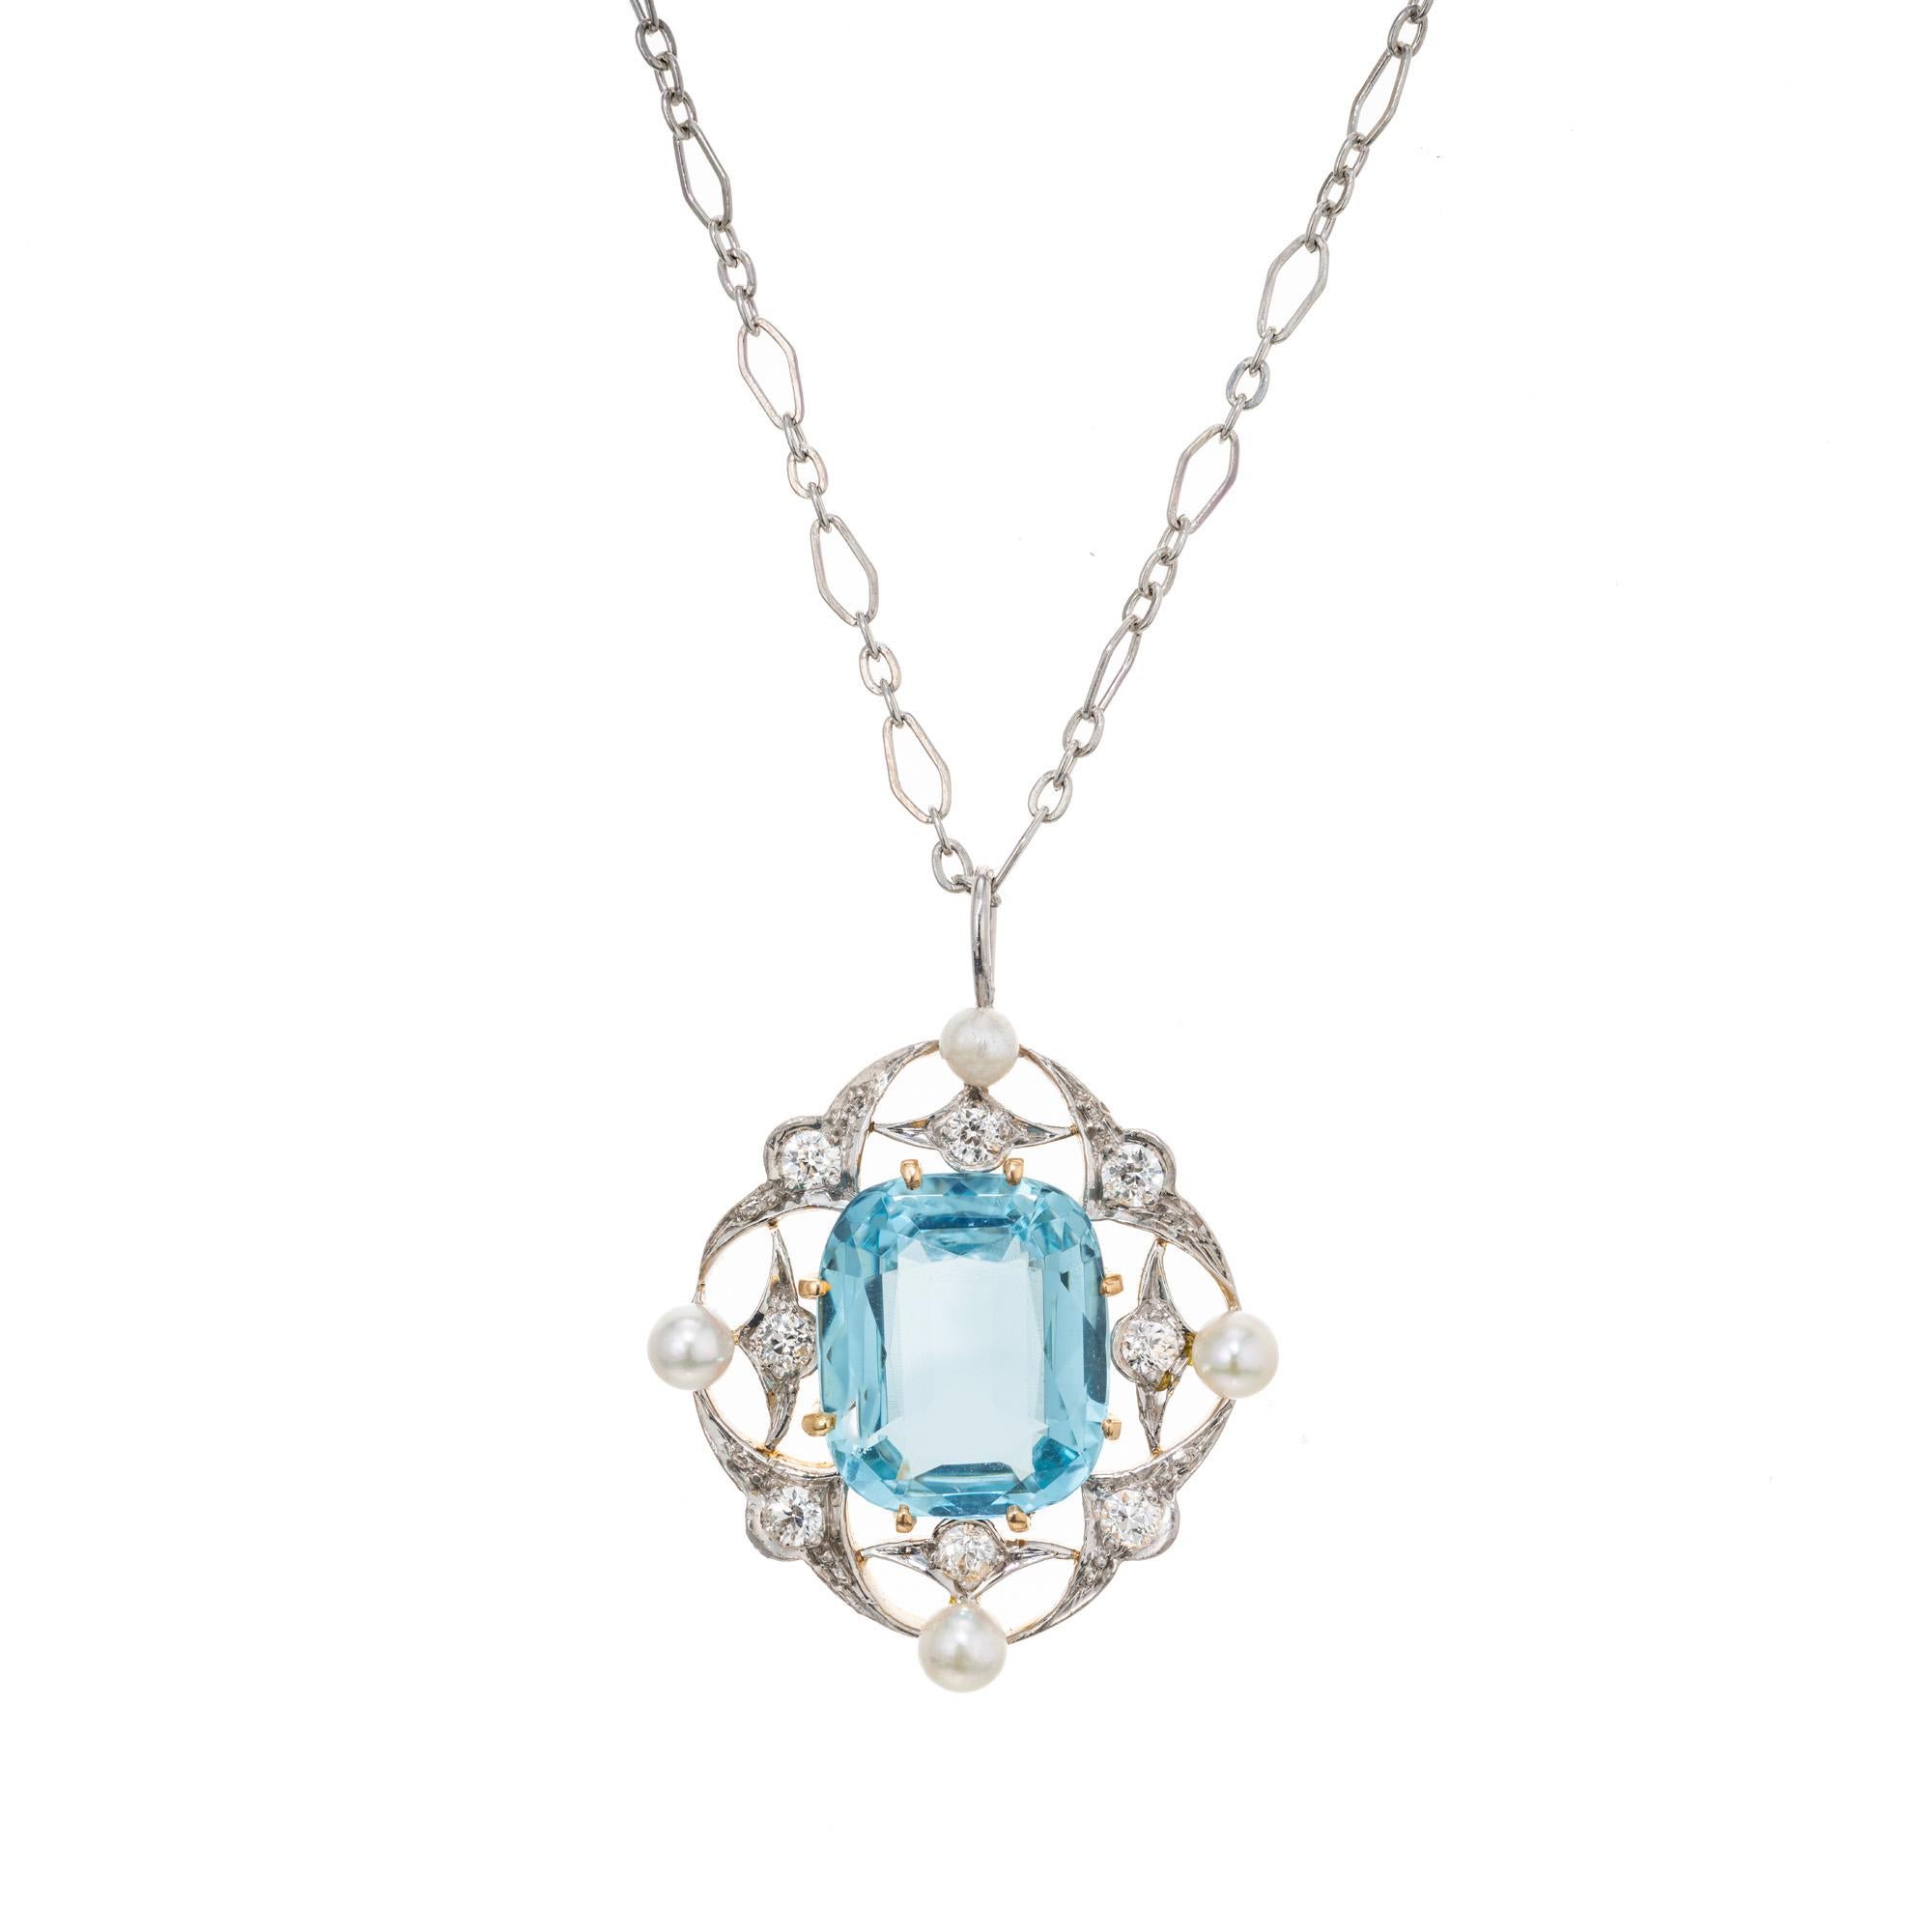 Beautiful mid-century 1860's antique aqua, diamond and pearl pendant necklace. 5.00ct cushion cut aquamarine center stone, set in a handmade platinum and 14k yellow gold setting, accented by 8 old mine cut diamonds and 4 white cultured pearls. .